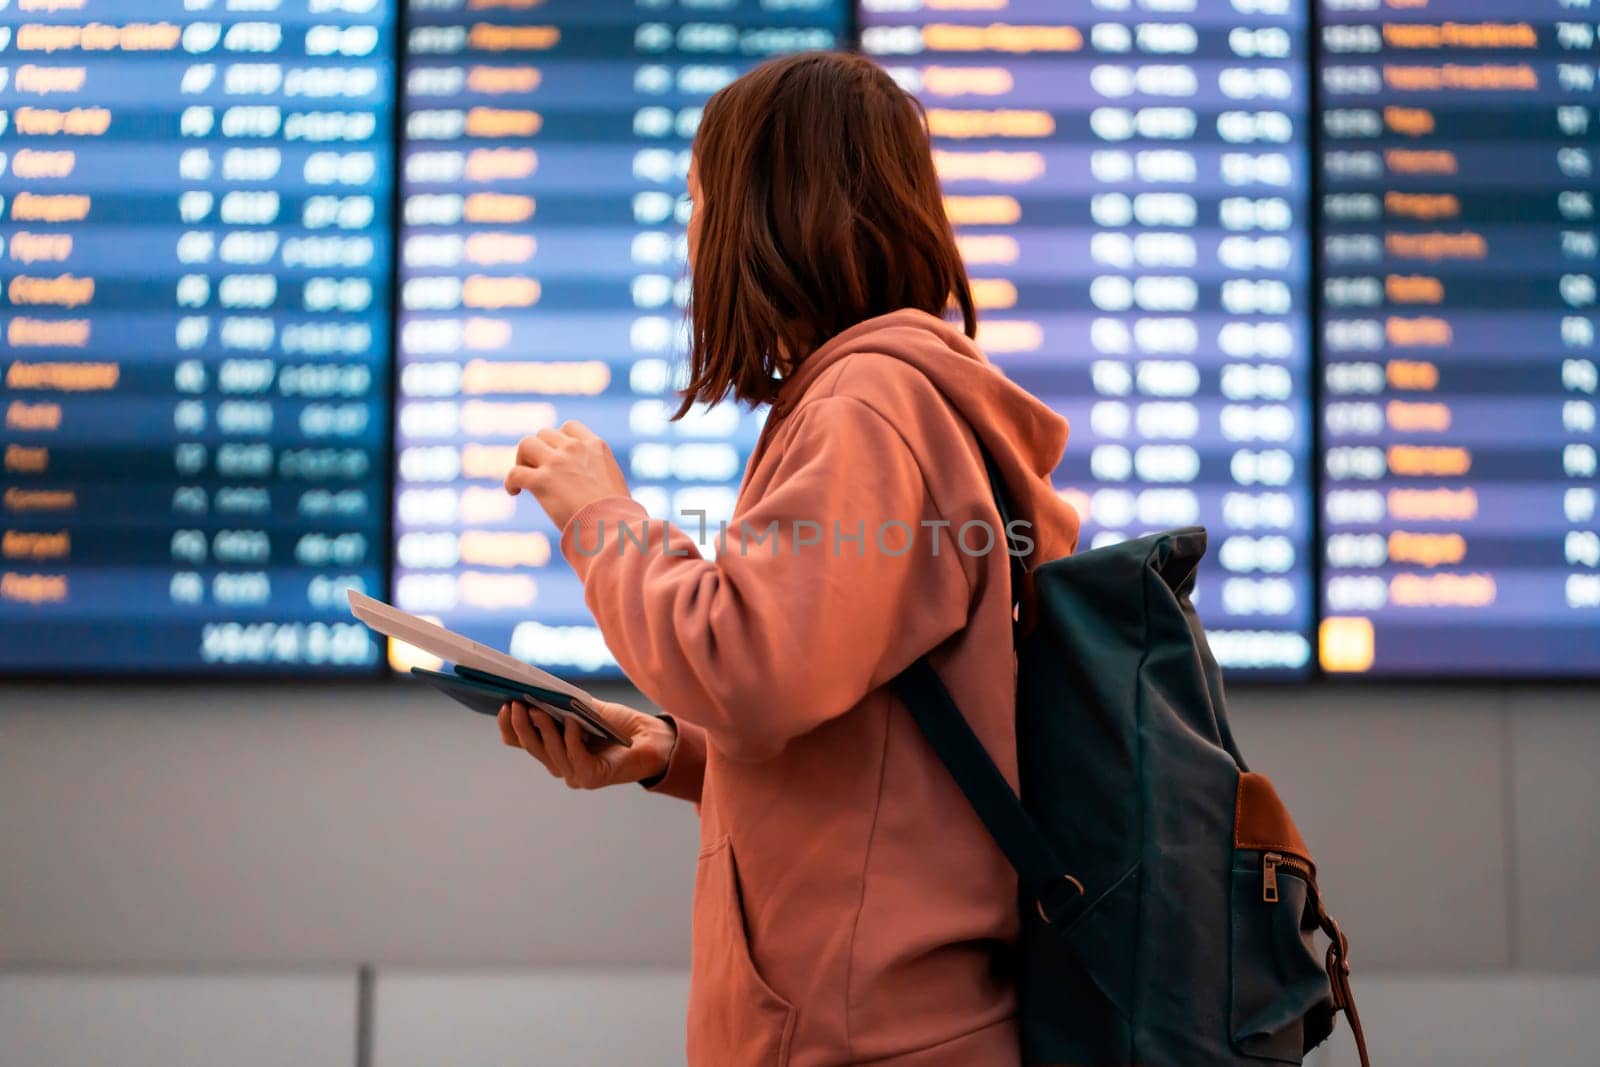 The girl goes on a flight in the airport, holds a passport and tickets in her hands, looks at the gate number in search of her plane, the woman goes on a trip with a backpack.